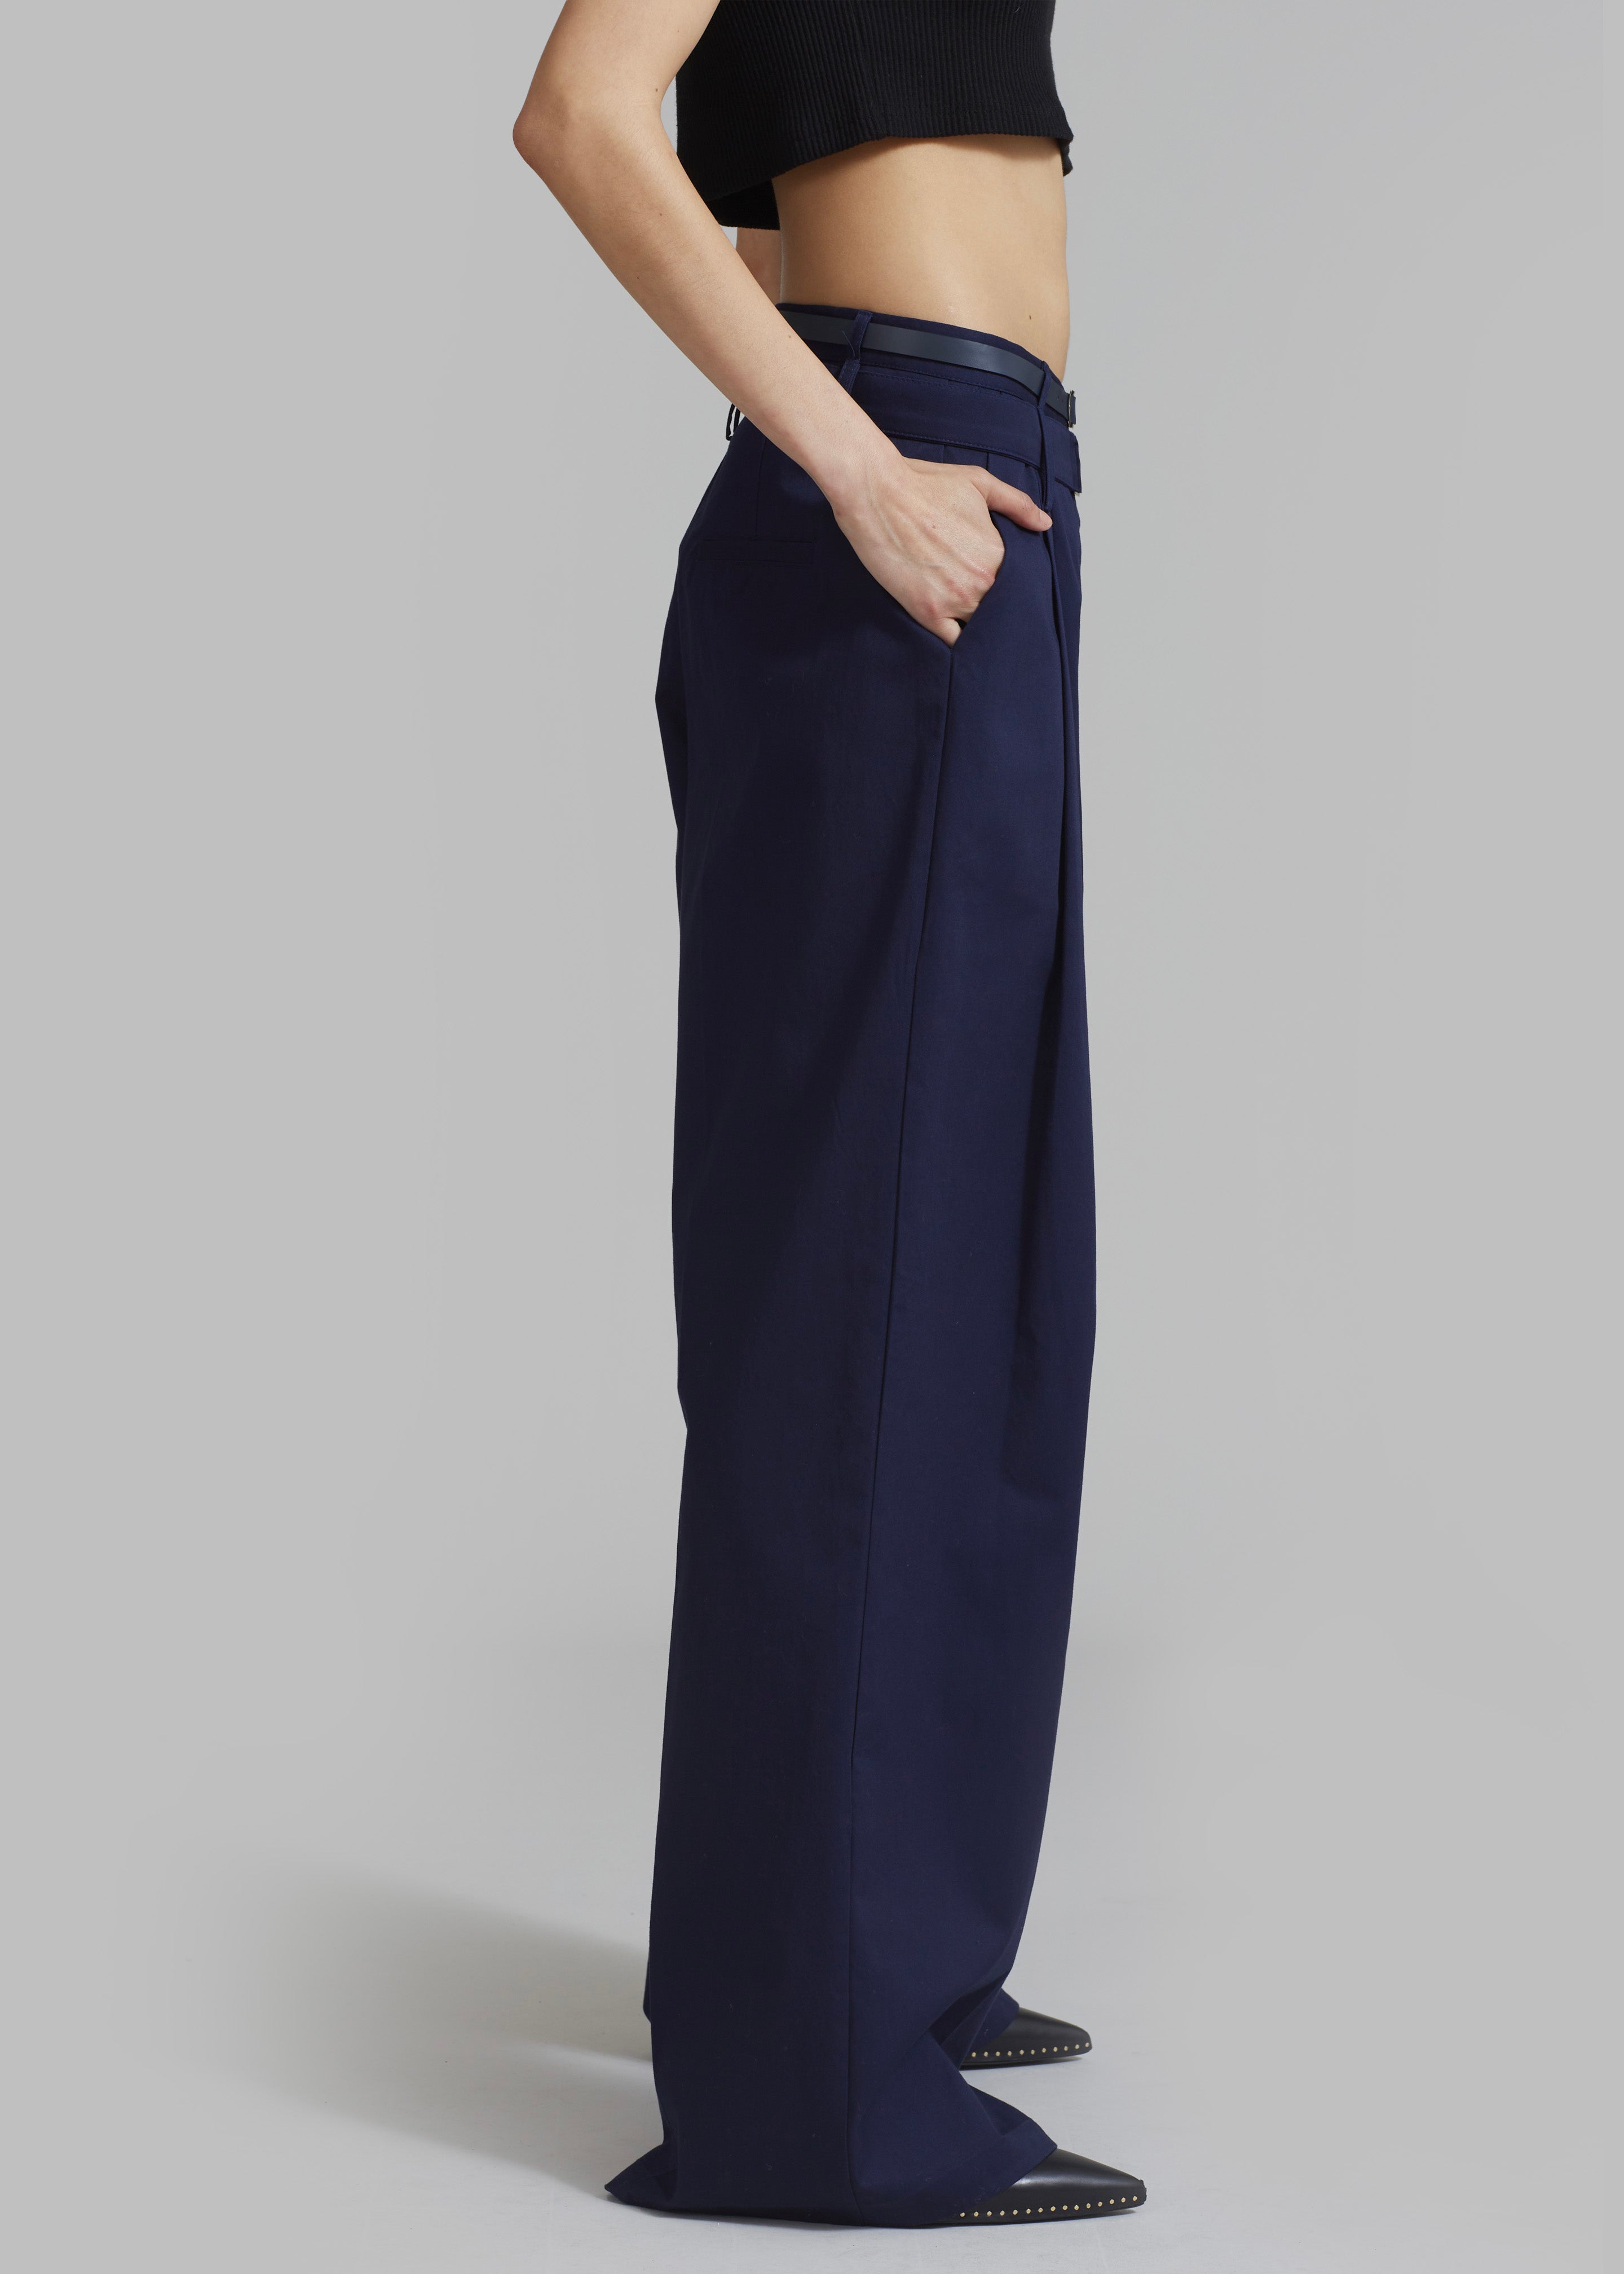 Joan Double Belted Pants - Navy - 7